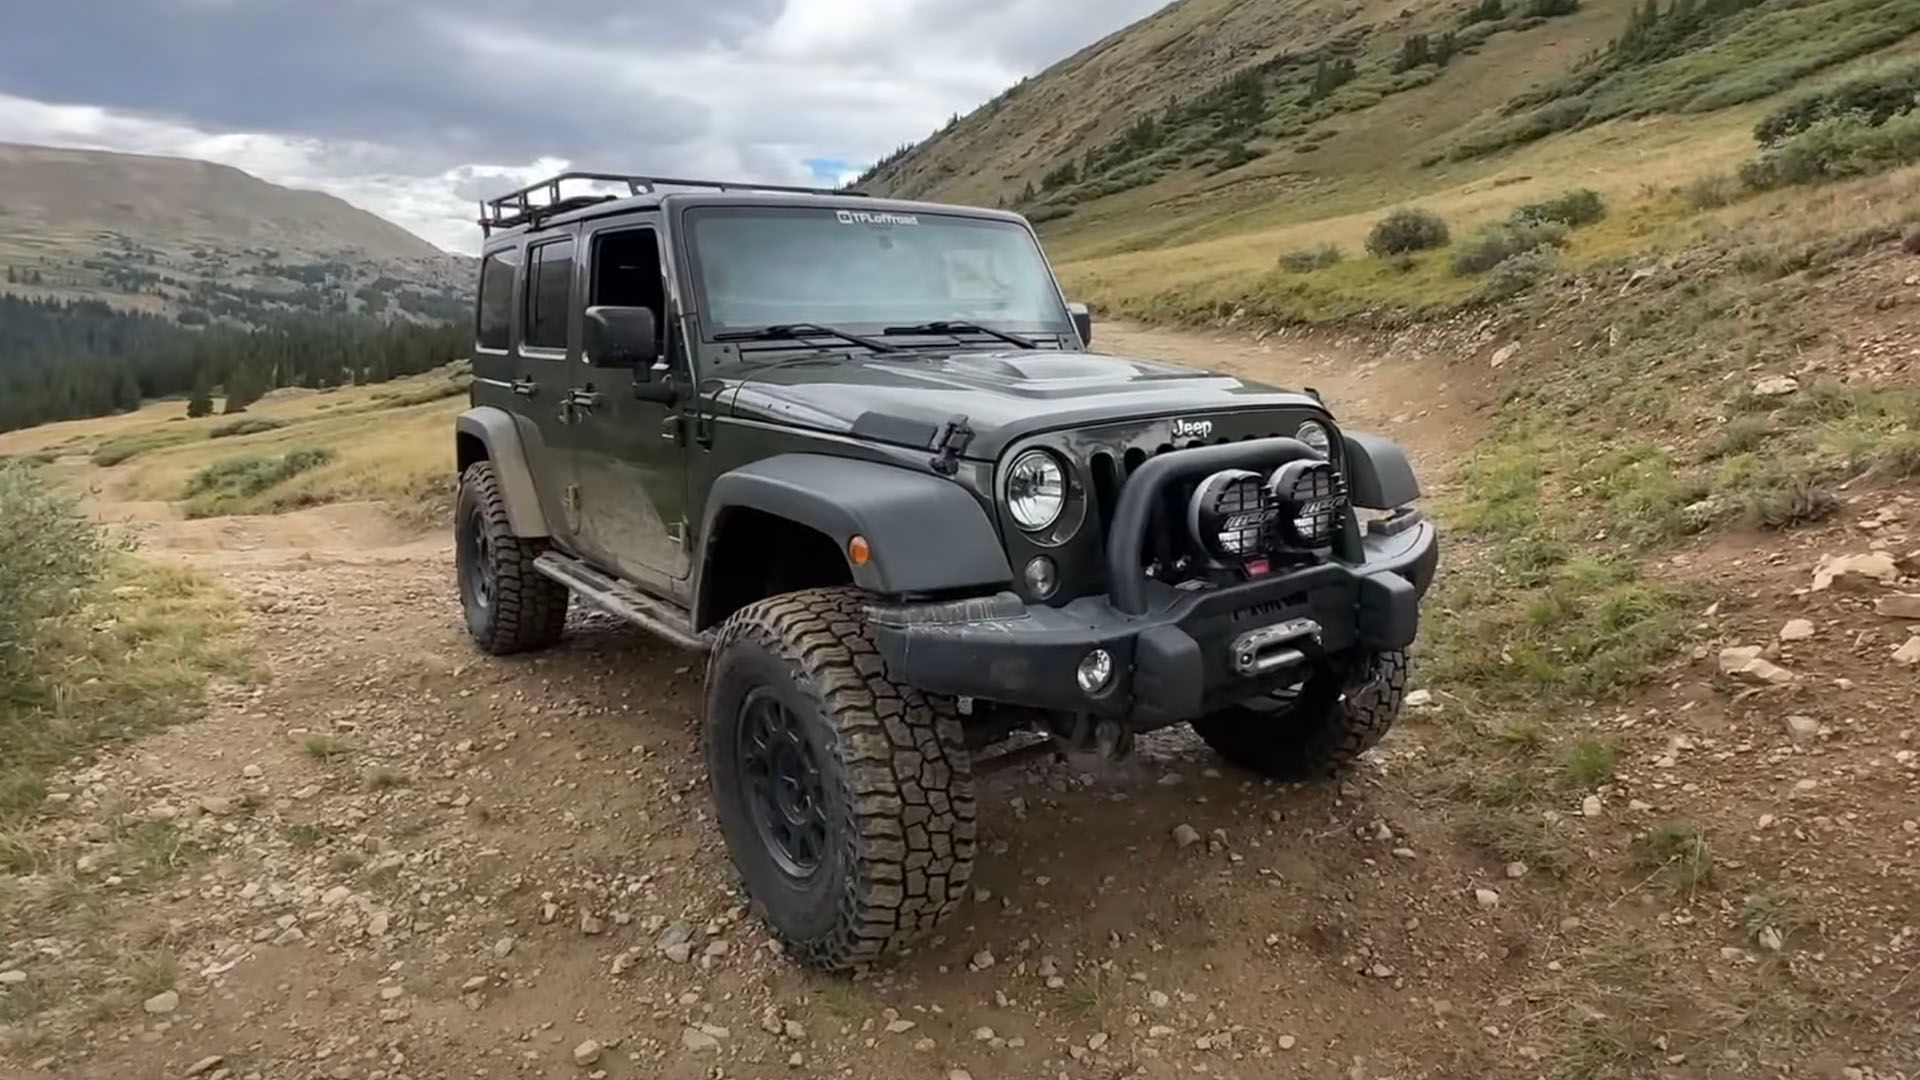 The 2016 Jeep Wrangler equipped with AEV upgrades